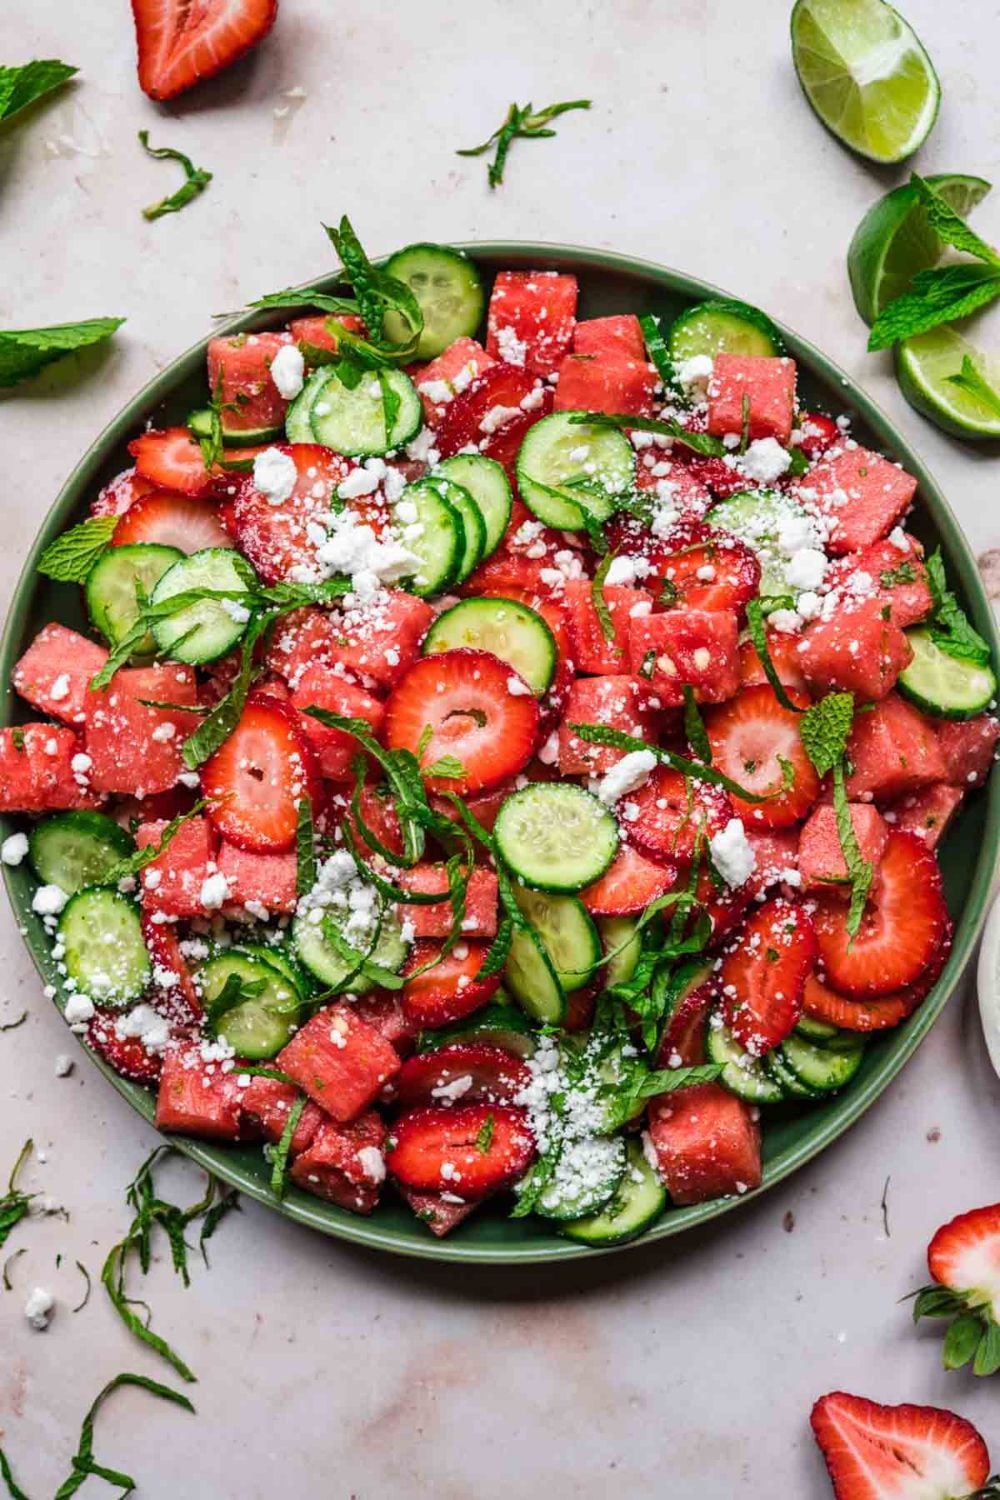 Watermelon Cucumber Salad With Strawberries And Feta